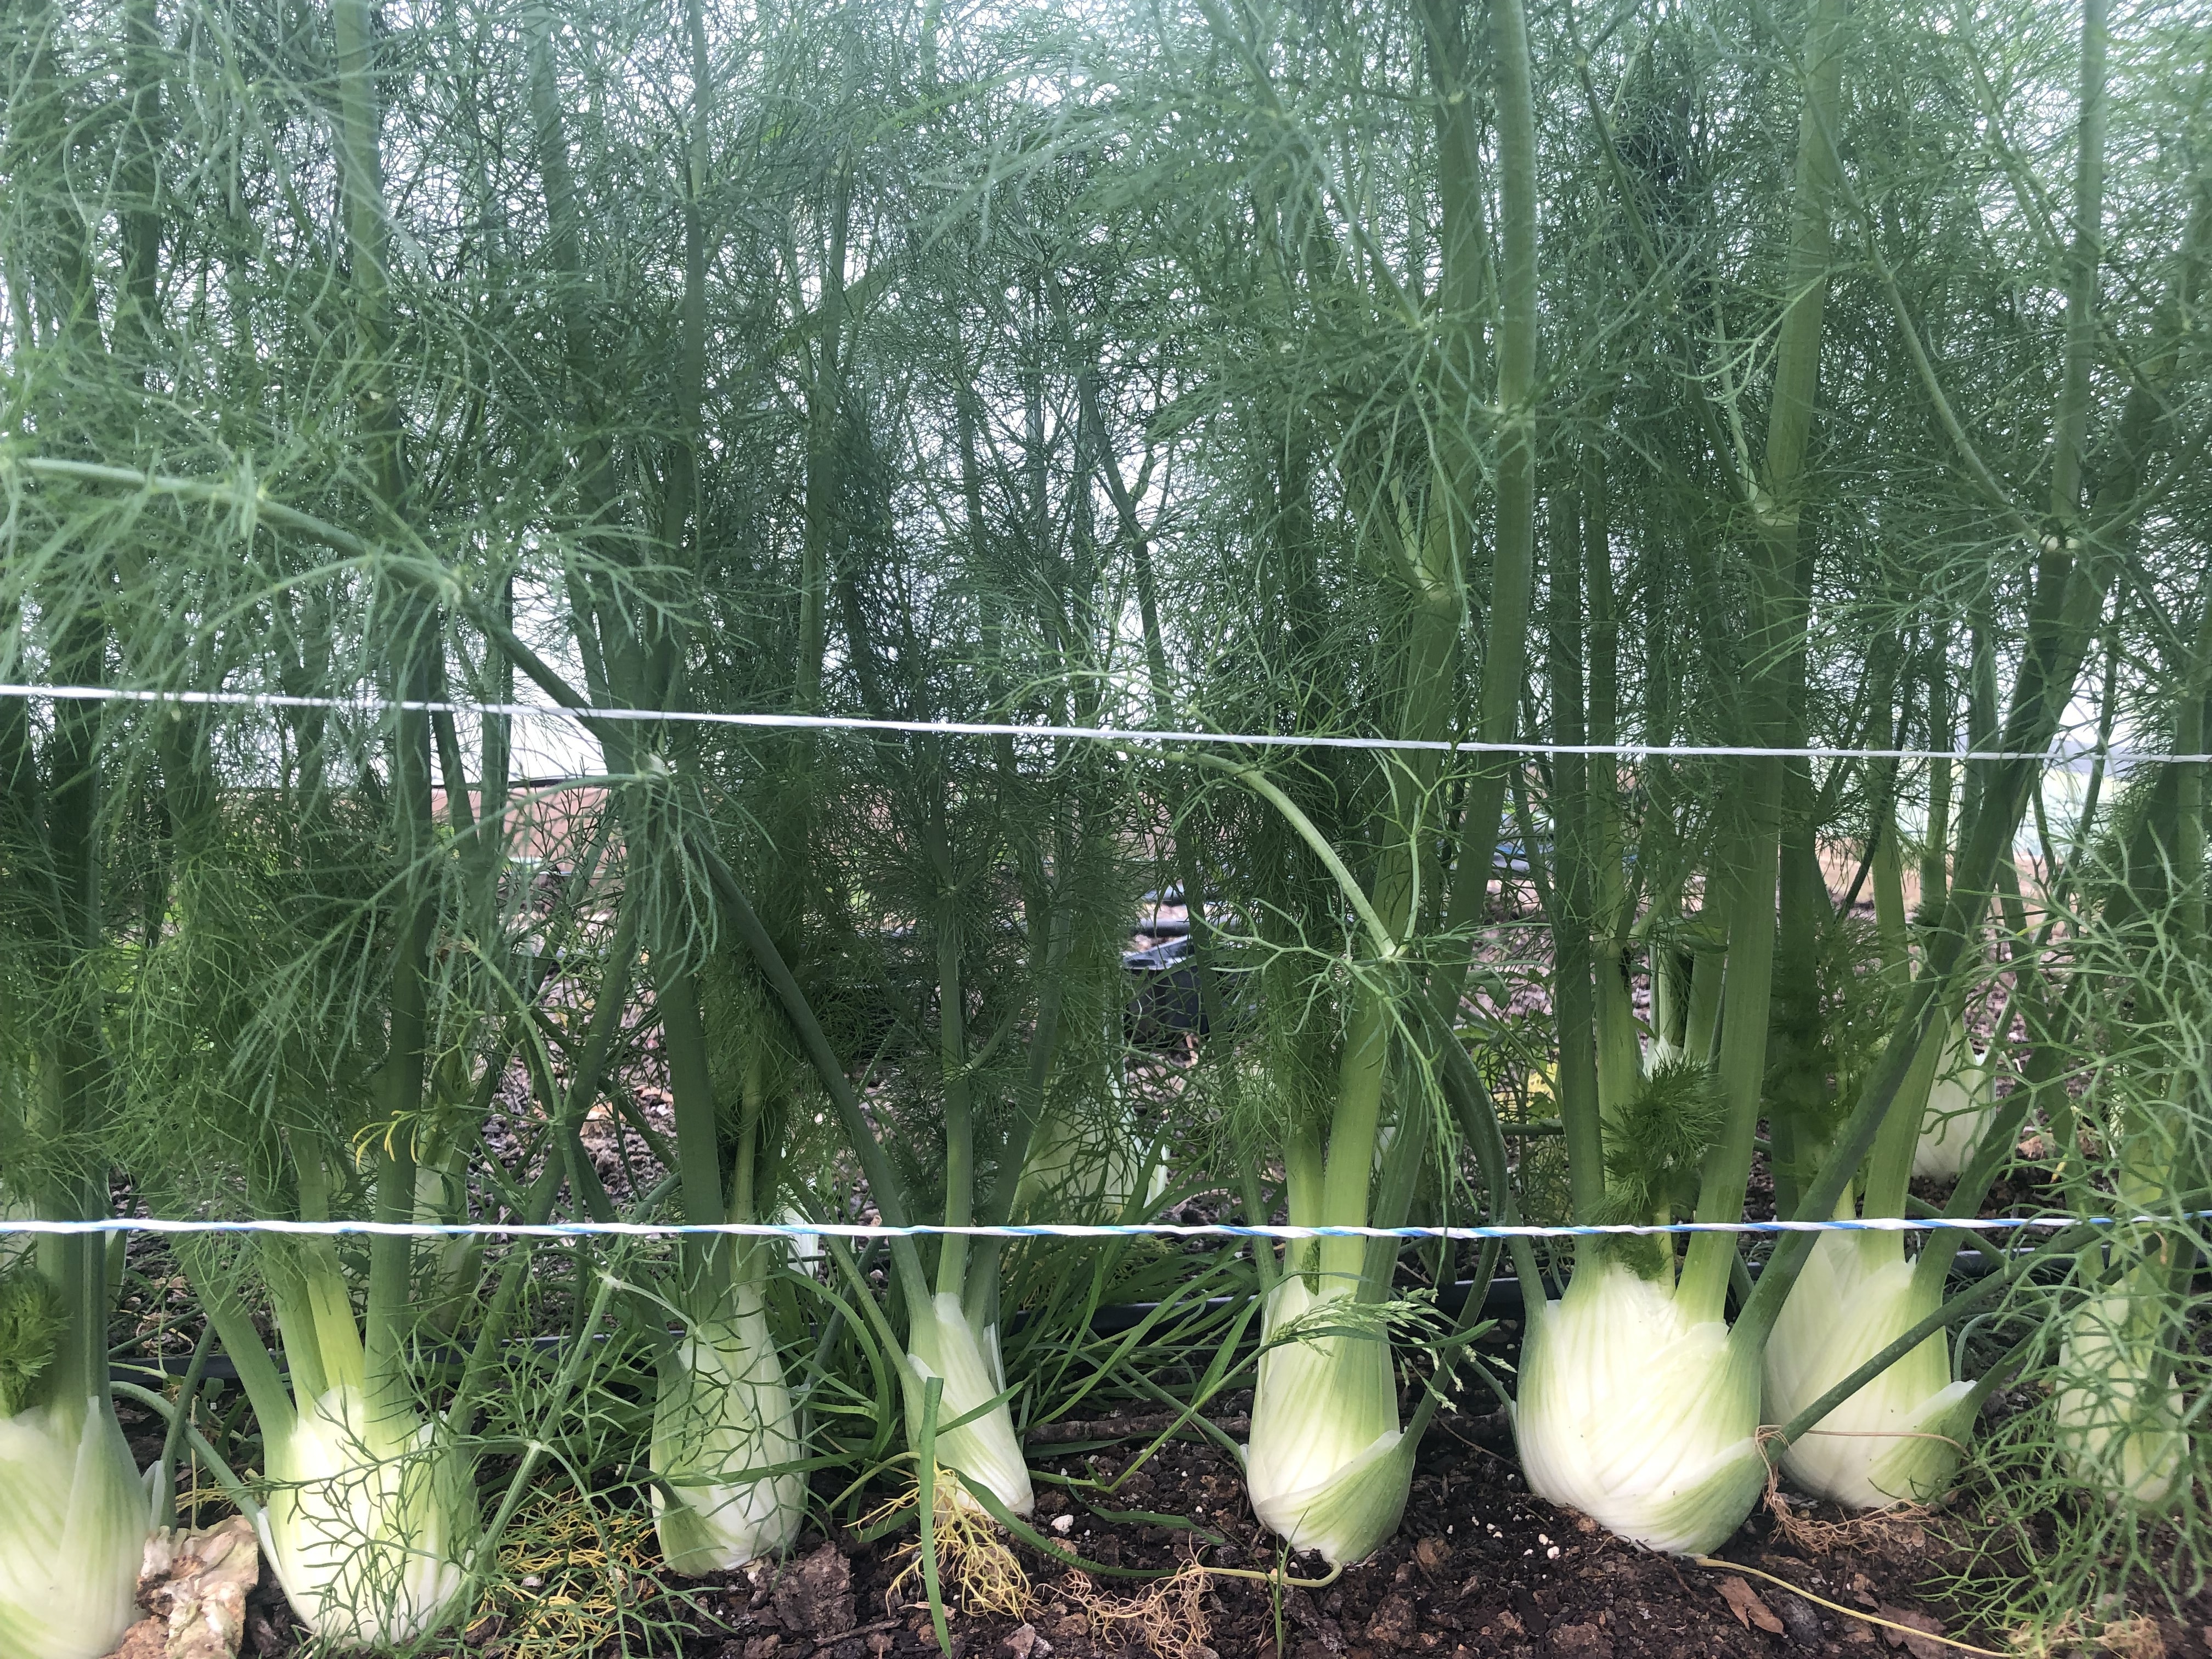 row of 8 fennel growing in the ground. Medium-sized white bulbs dark green feathery leaves